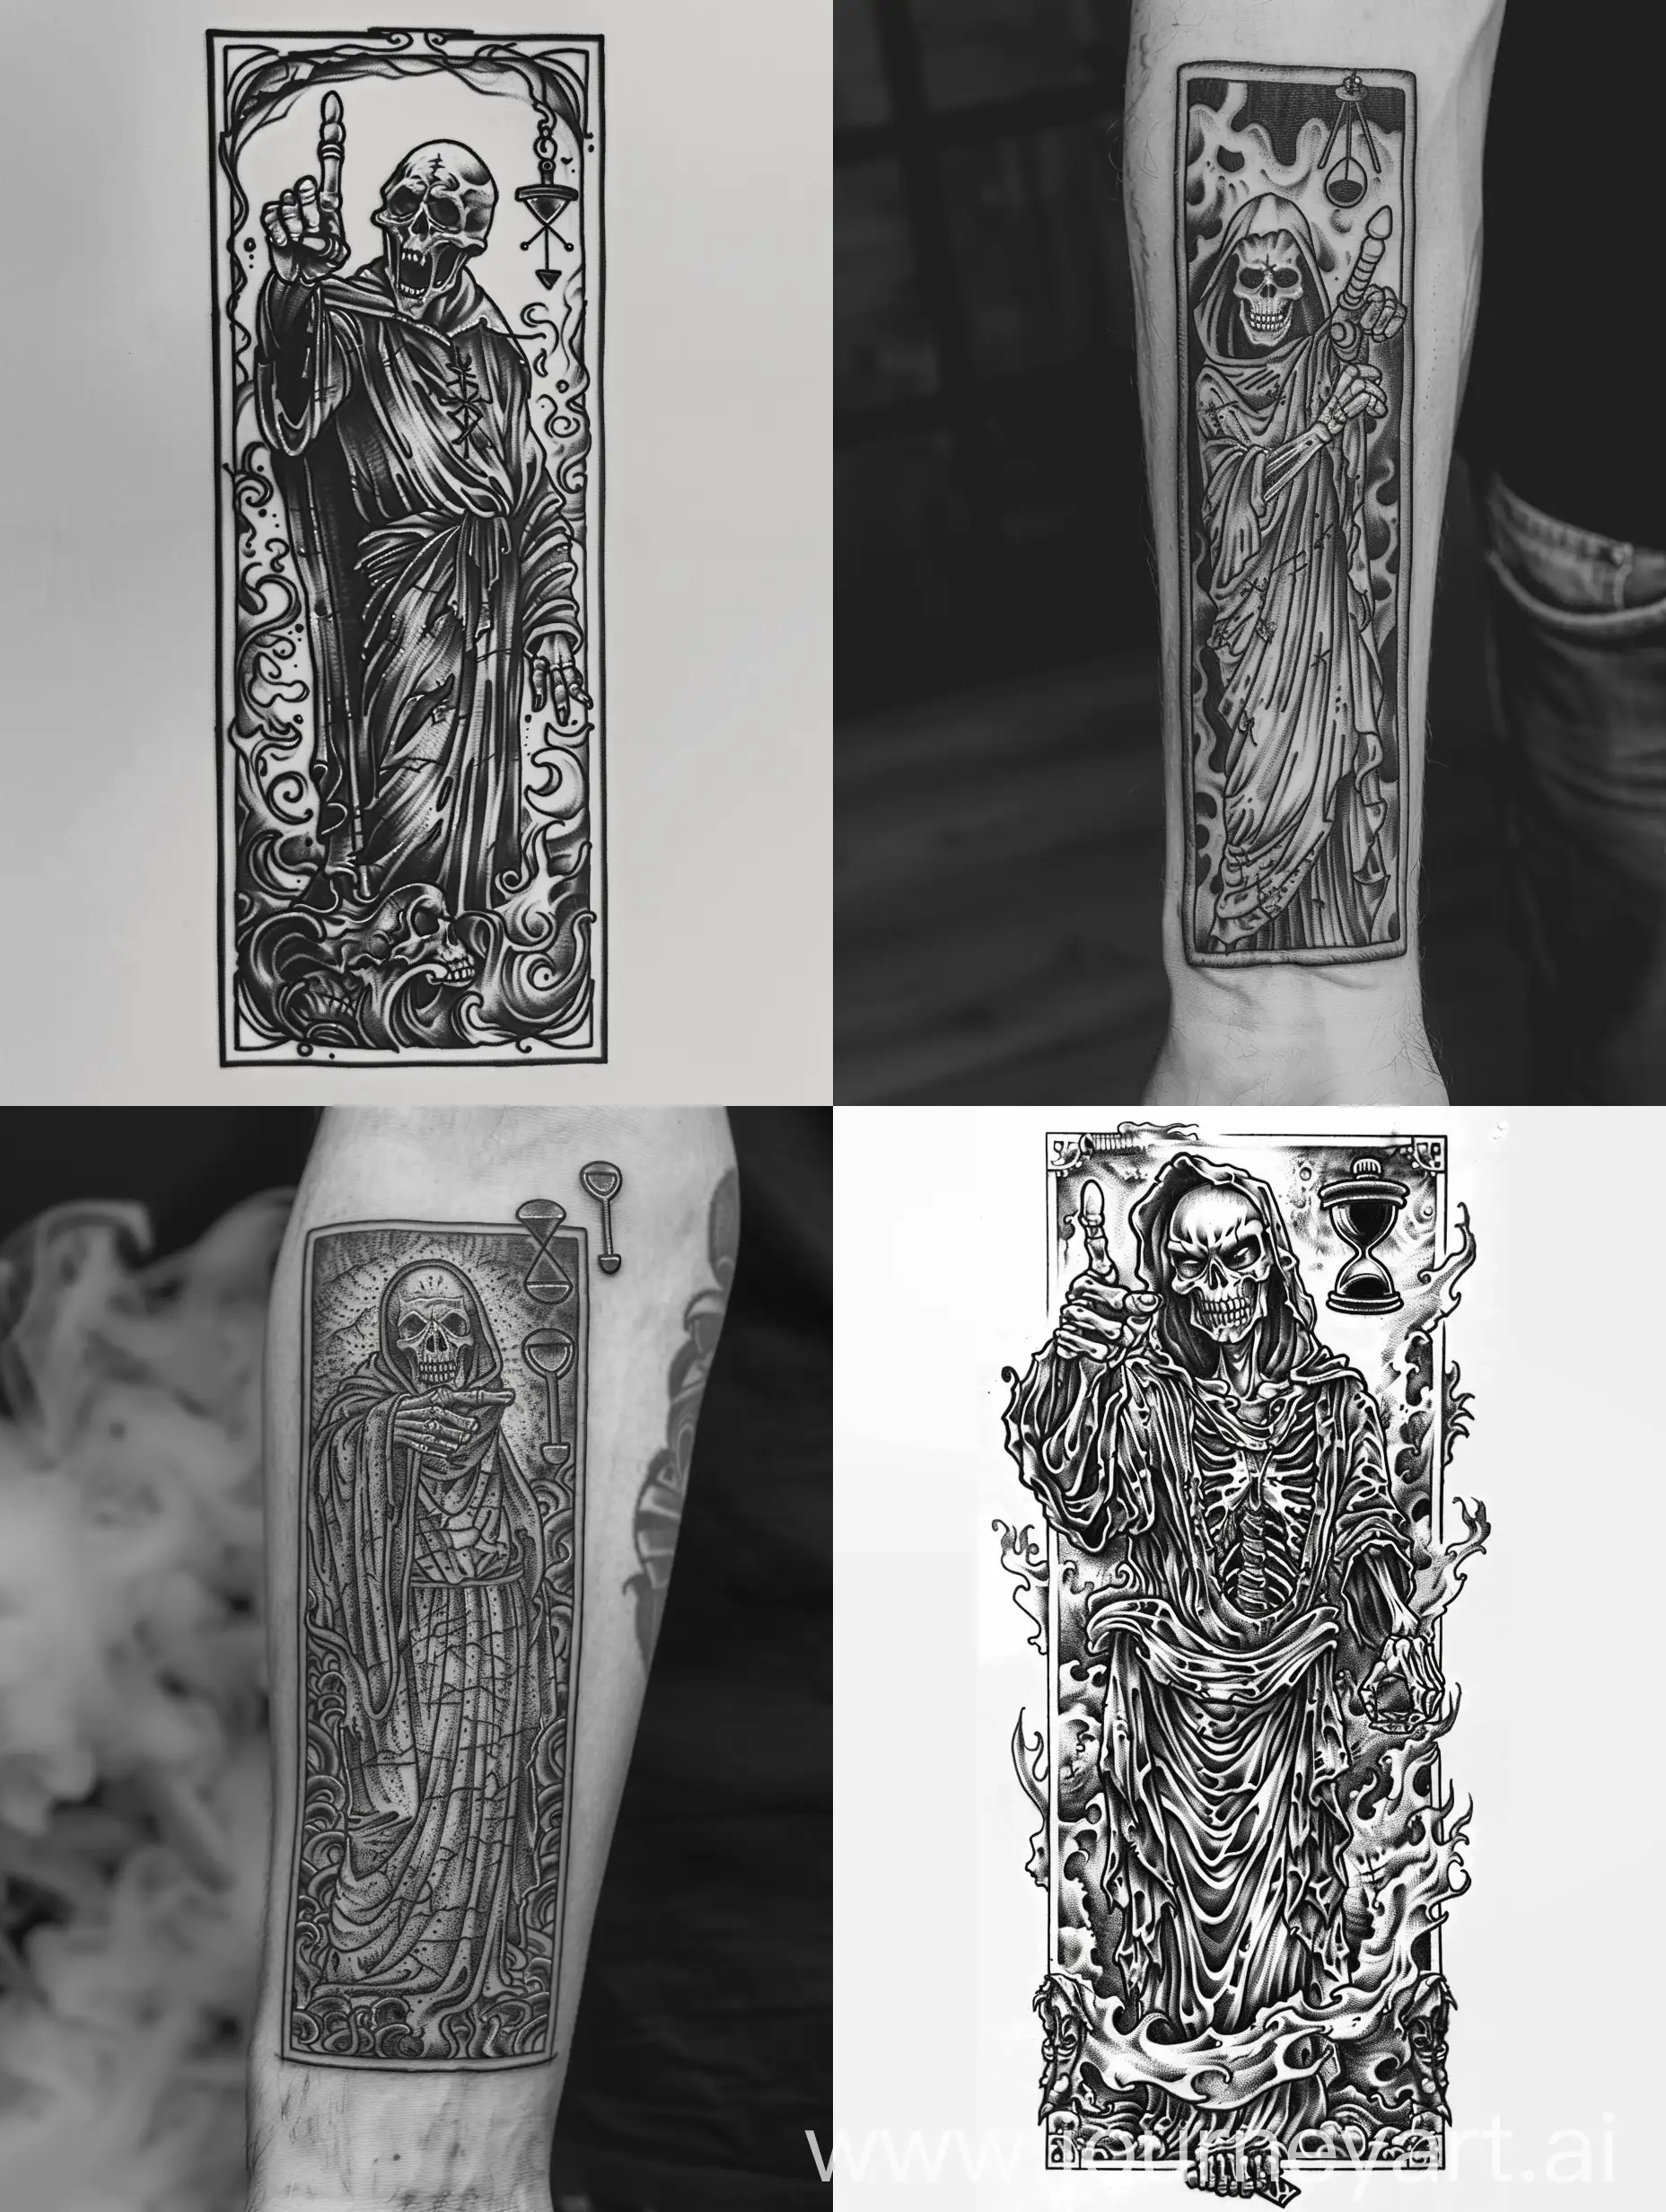 Sinister-Grim-Reaper-Tattoo-Design-with-Pointing-Finger-and-Foreboding-Hourglass